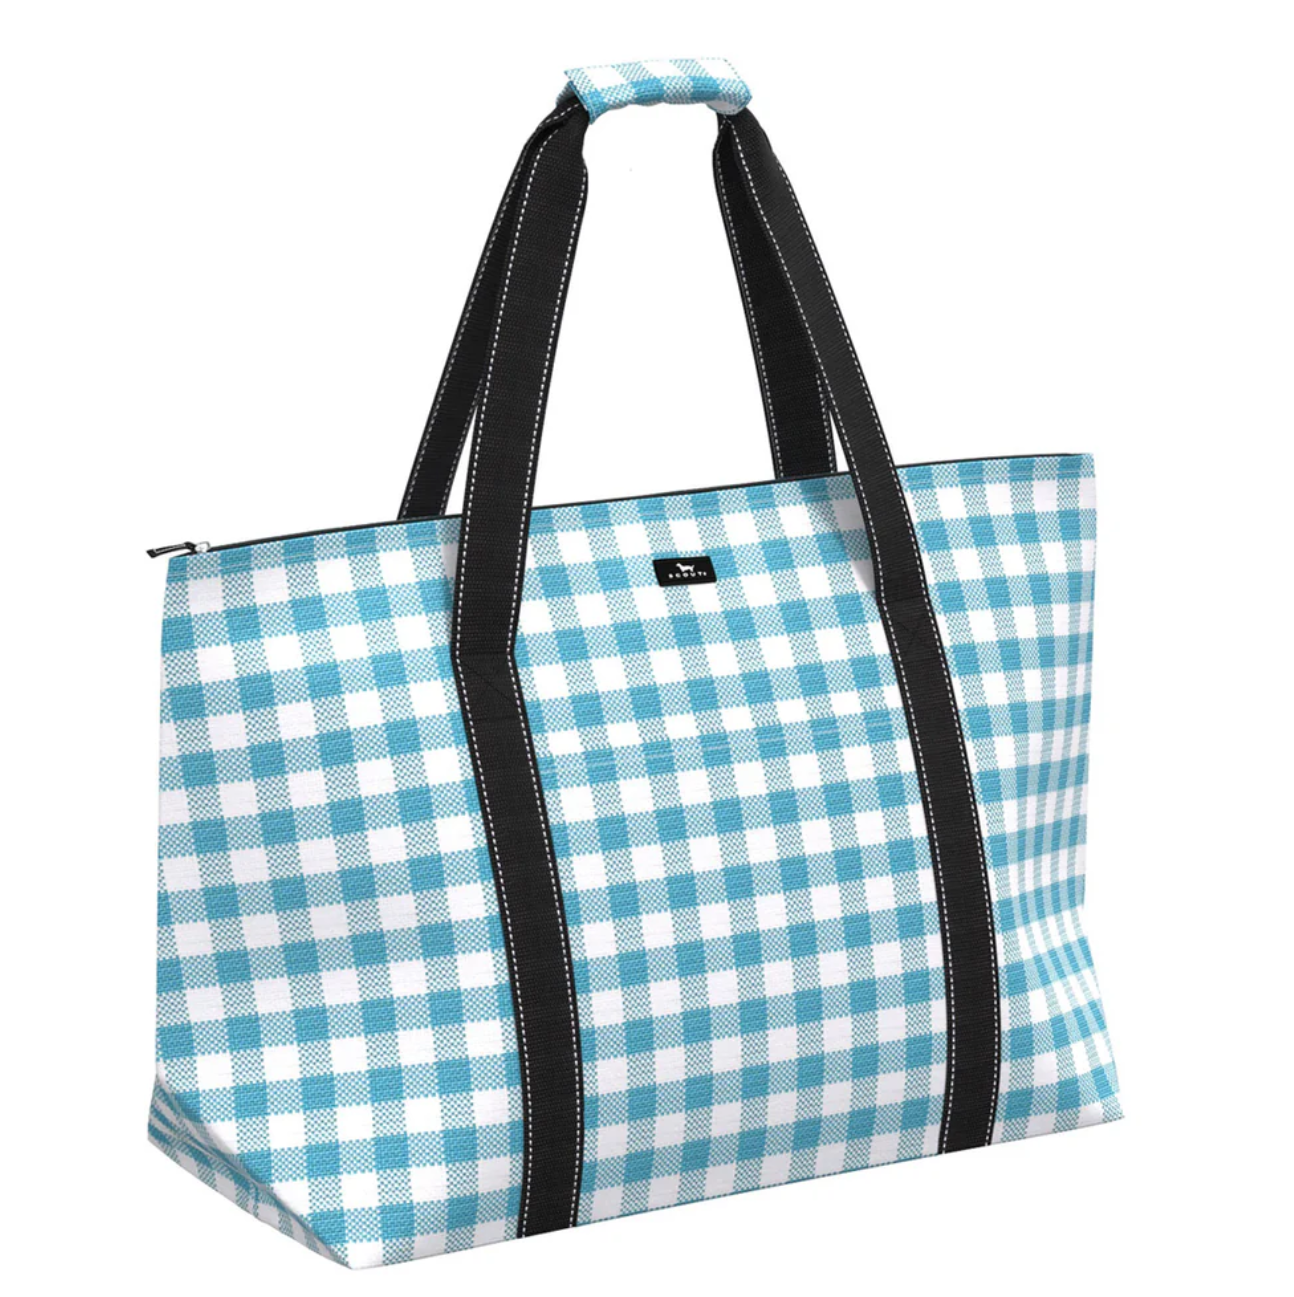 Scout On Holiday Tote Totes in Pool Check at Wrapsody